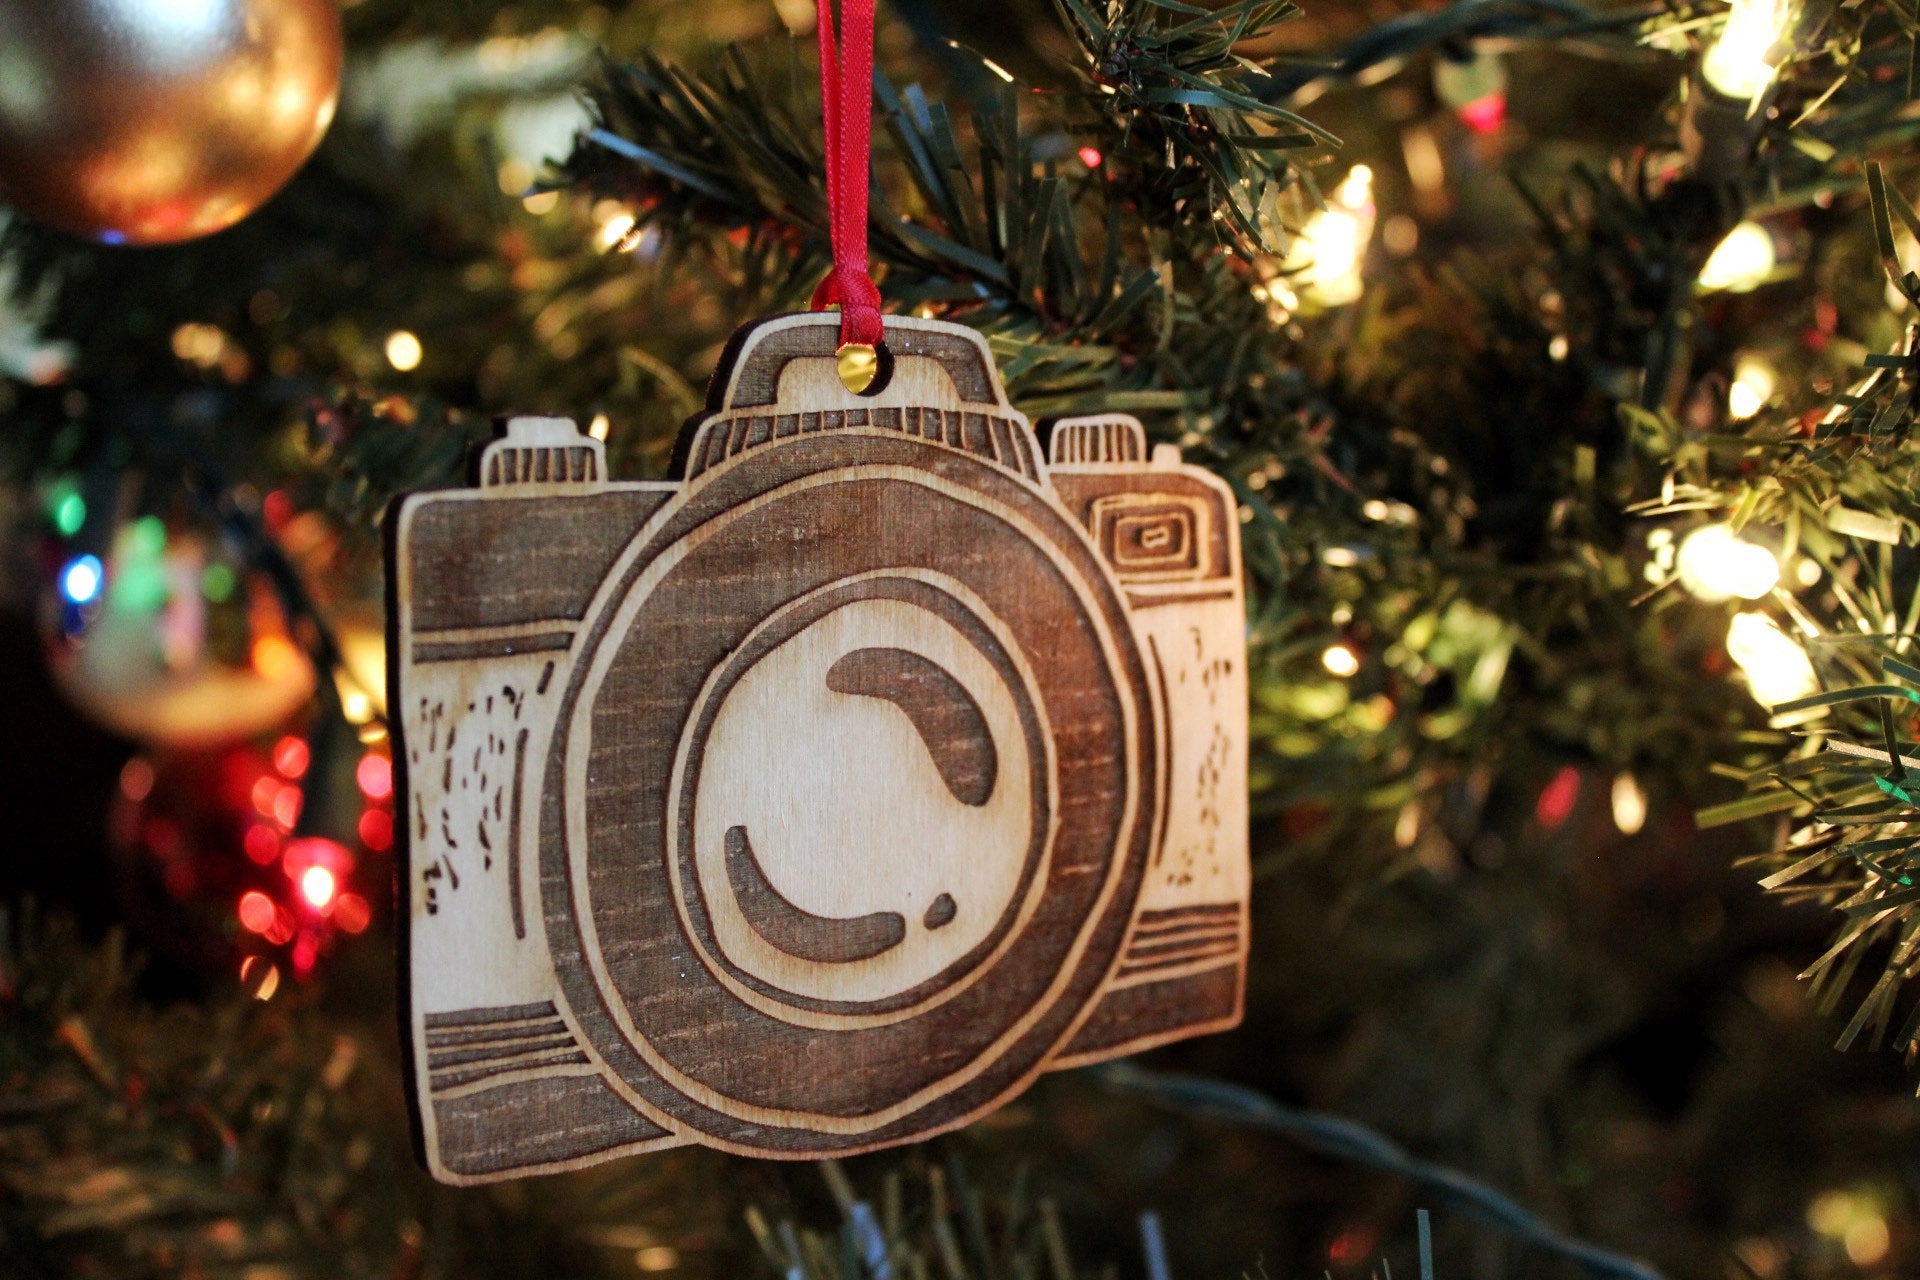 Vintage Camera Wooden Christmas Ornament Decoration For Photographers, Cute Engraved Rustic Camera Holiday Decor Gift